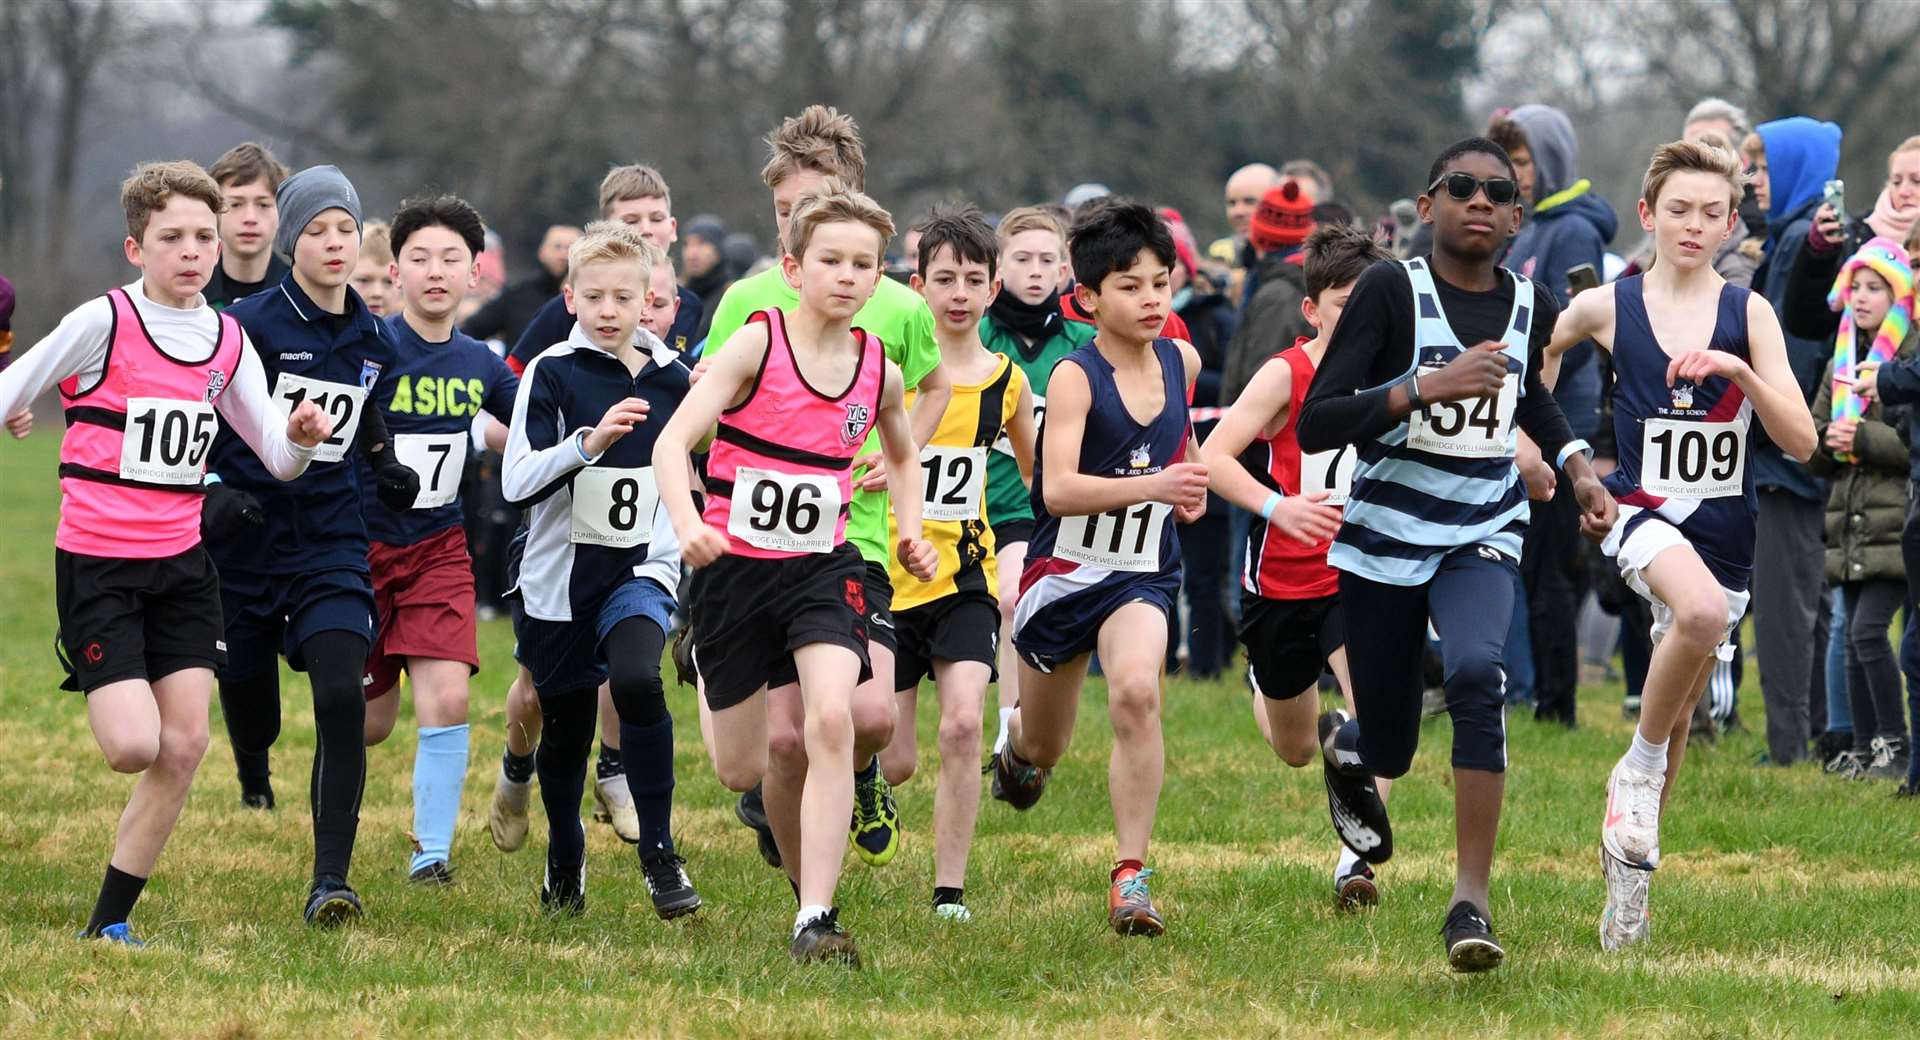 The Year 7 boys are up and running. Picture: Barry Goodwin (54437818)